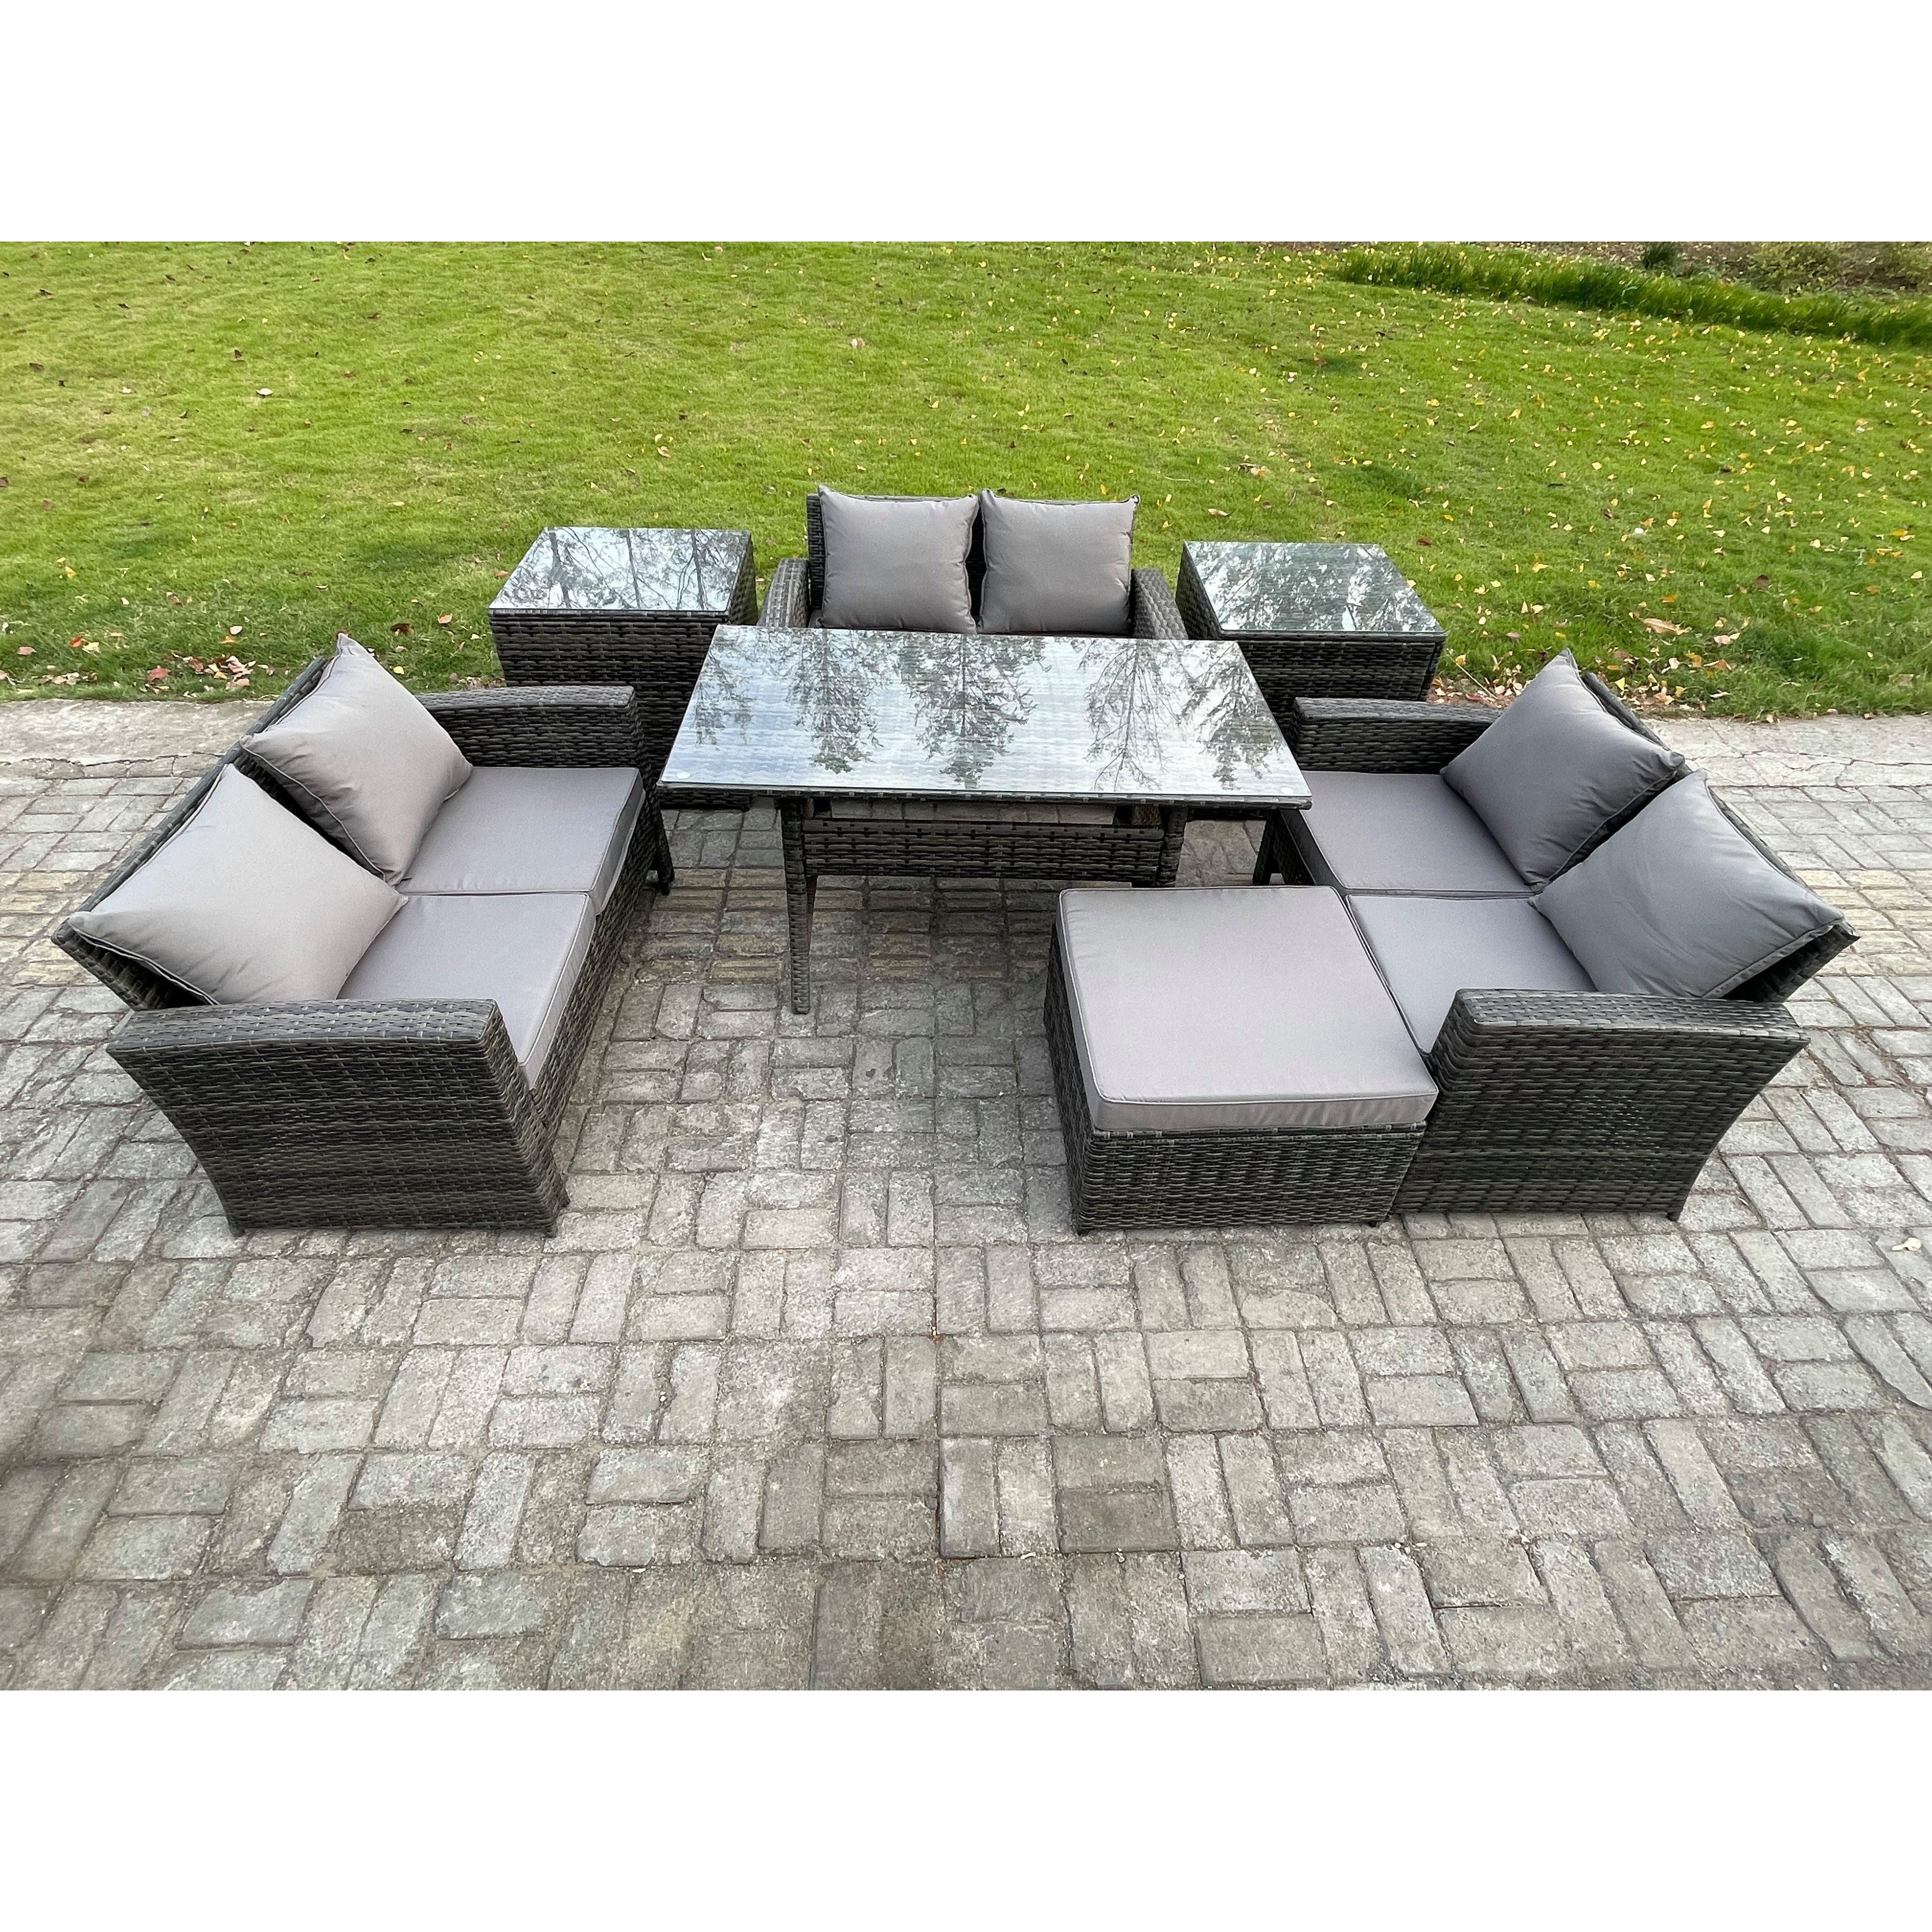 Wicker PE Rattan Garden Furniture Sets Outdoor Lounge Sofa Set with Oblong Dining Table Double Seat Sofa 2 Side Tables - image 1